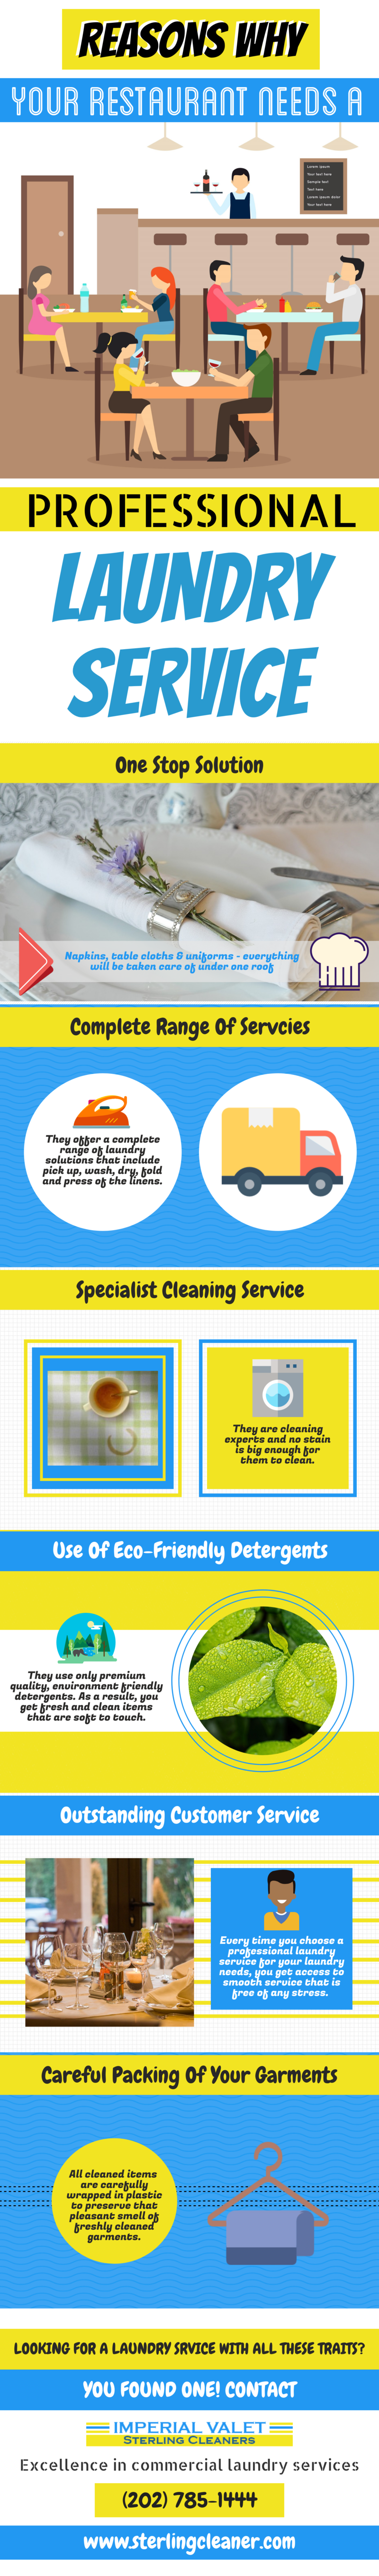 Reasons Why Your Restaurant Needs A Professional Laundry Service